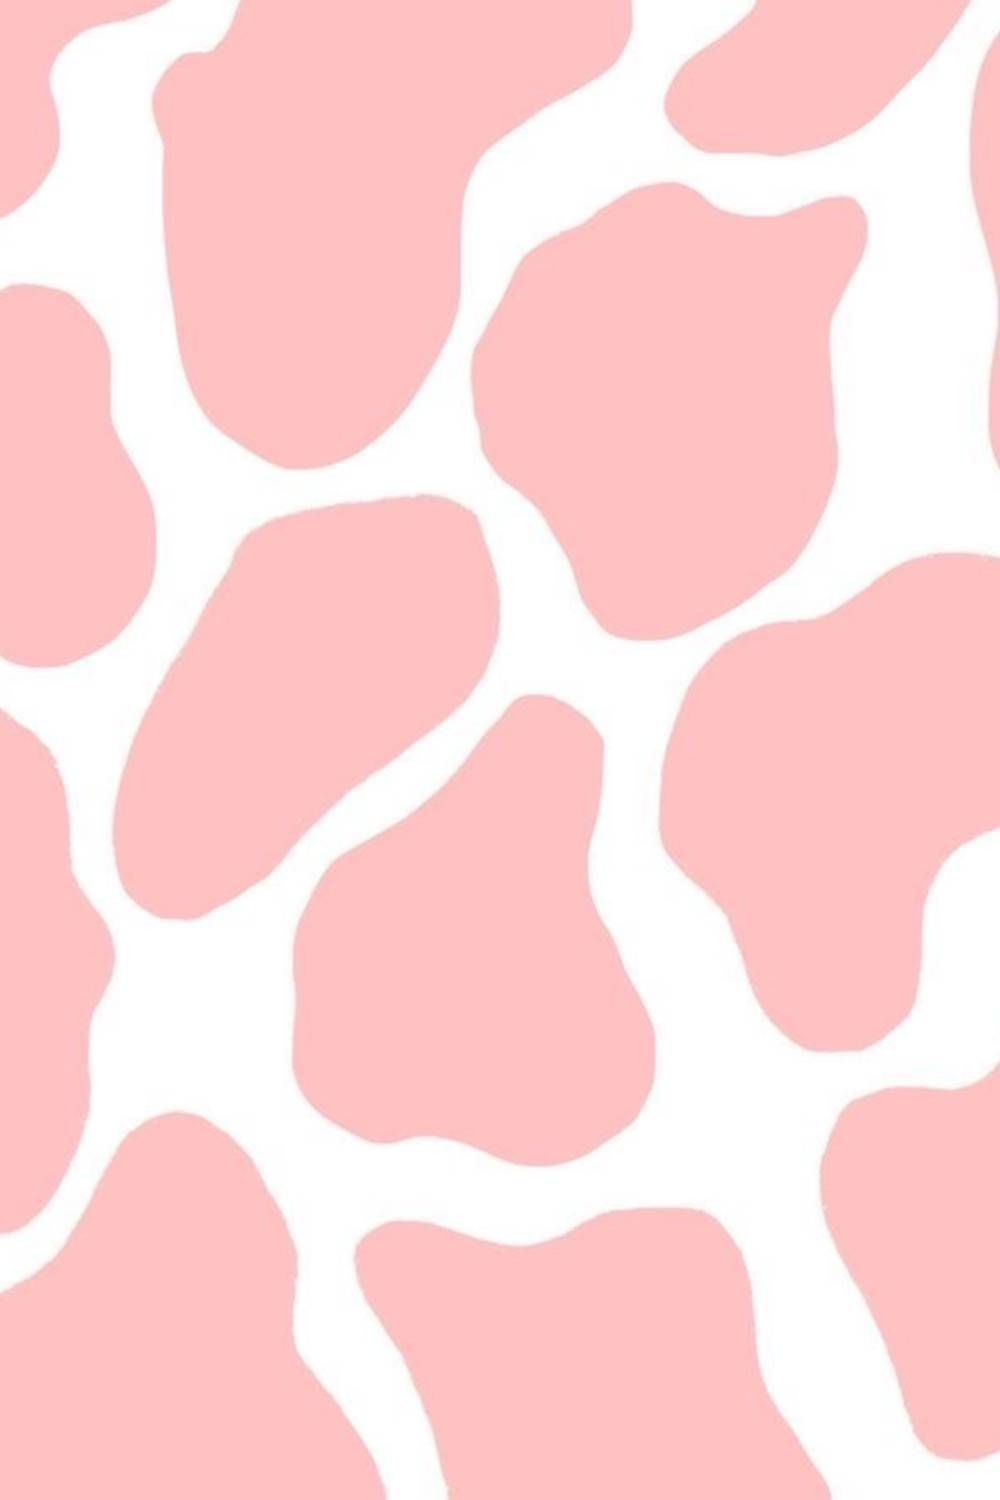 Pink Cow Print Wallpapers